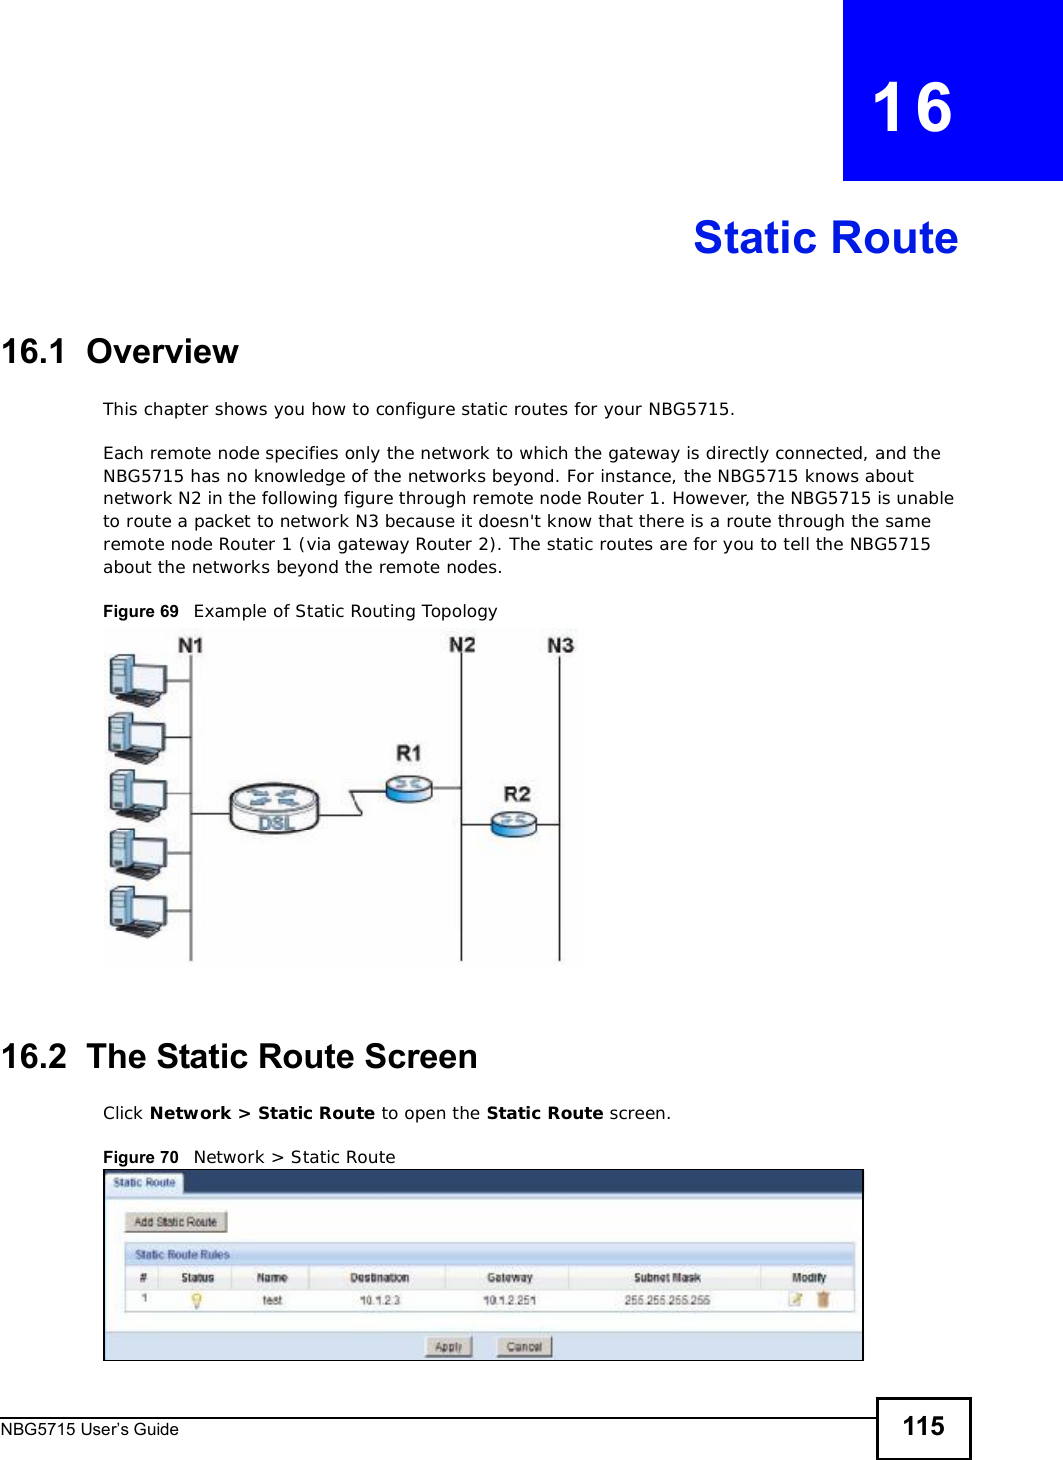 NBG5715 User’s Guide 115CHAPTER   16Static Route16.1  OverviewThis chapter shows you how to configure static routes for your NBG5715.Each remote node specifies only the network to which the gateway is directly connected, and the NBG5715 has no knowledge of the networks beyond. For instance, the NBG5715 knows about network N2 in the following figure through remote node Router 1. However, the NBG5715 is unable to route a packet to network N3 because it doesn&apos;t know that there is a route through the same remote node Router 1 (via gateway Router 2). The static routes are for you to tell the NBG5715 about the networks beyond the remote nodes.Figure 69   Example of Static Routing Topology16.2  The Static Route Screen Click Network &gt; Static Route to open the Static Route screen. Figure 70   Network &gt; Static Route